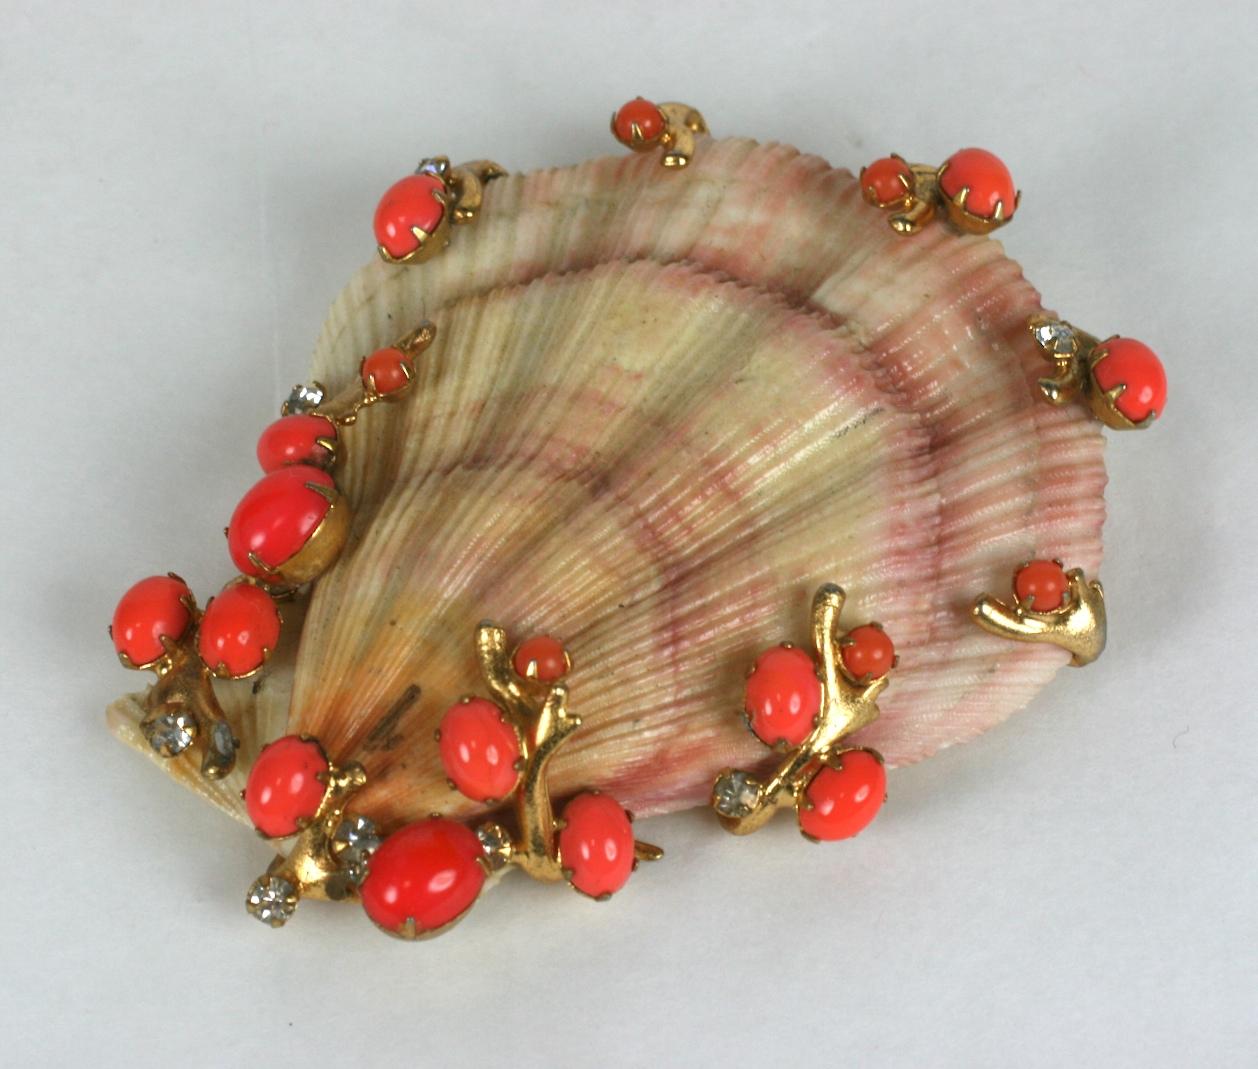 Large and rare Kenneth Jay Lane Jeweled Shell Brooch from the 1960's in the Verdura style.  Although unsigned, he was known for making these prototype pieces before later casting them for making mass production runs. 
Striking contrast of tones of